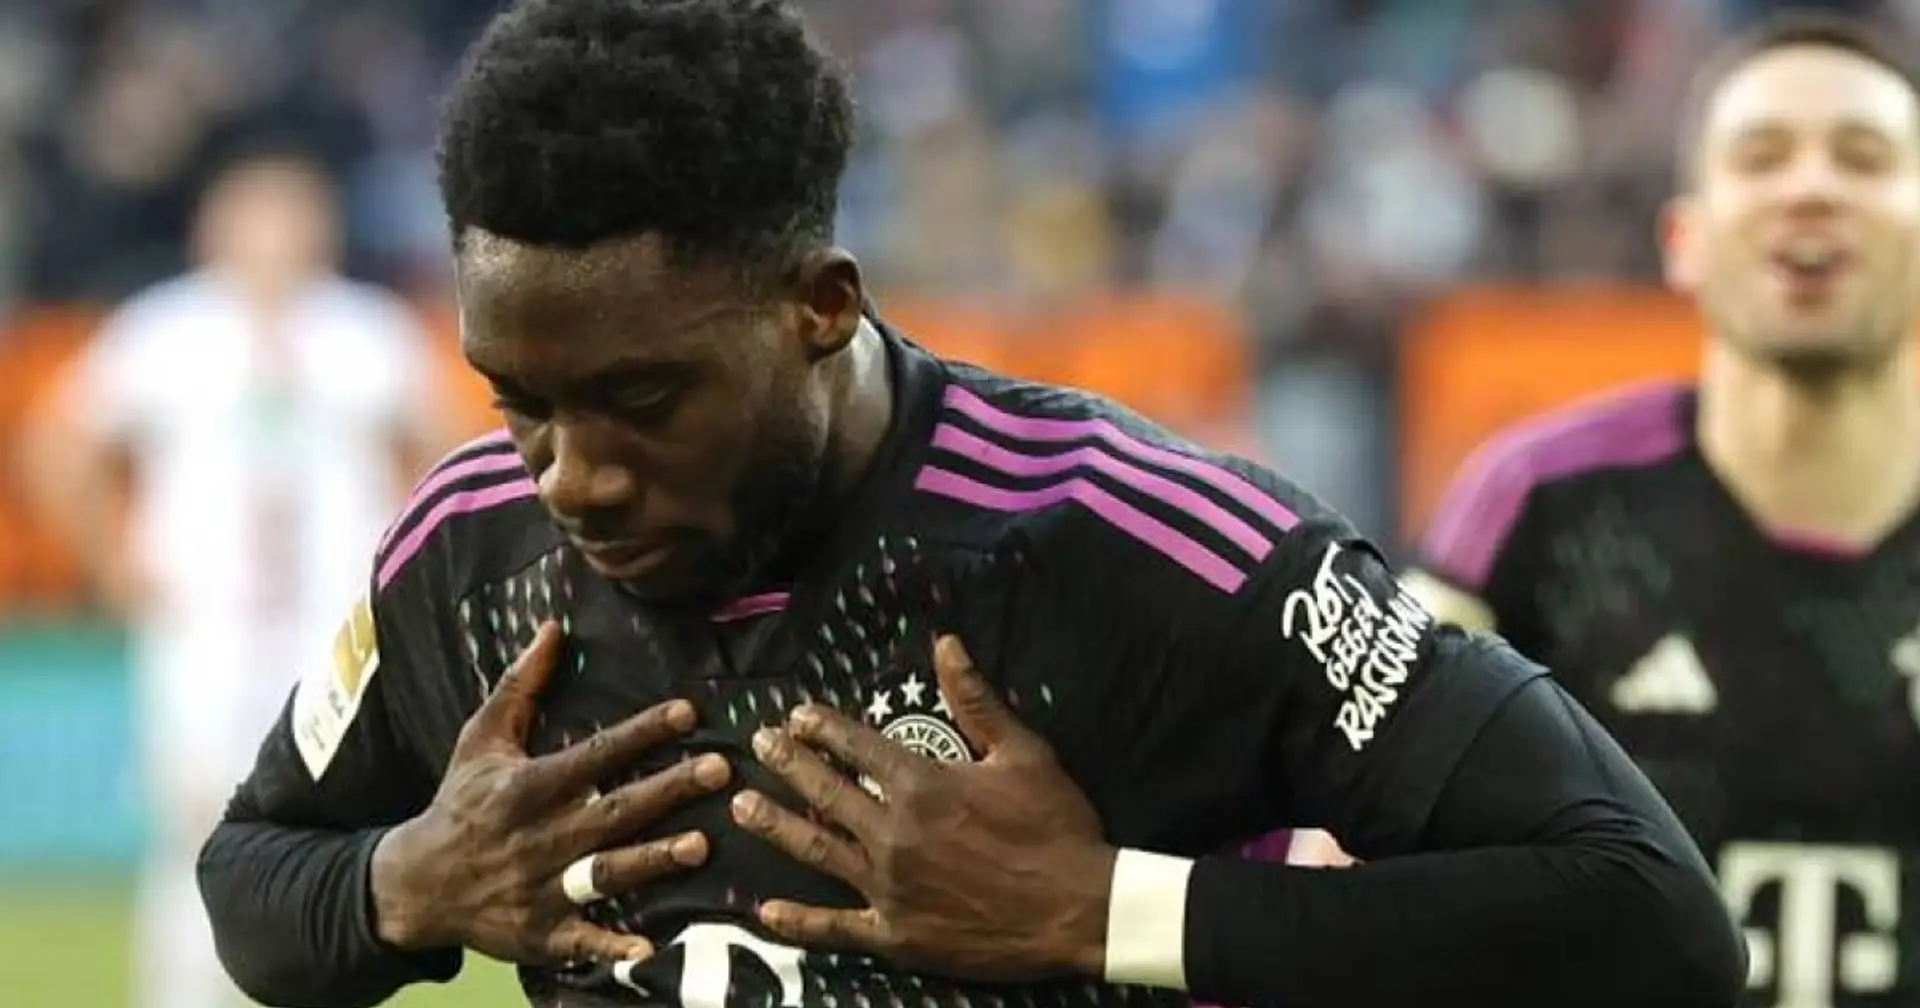 Fresh important update on Alphonso Davies-Real Madrid situation